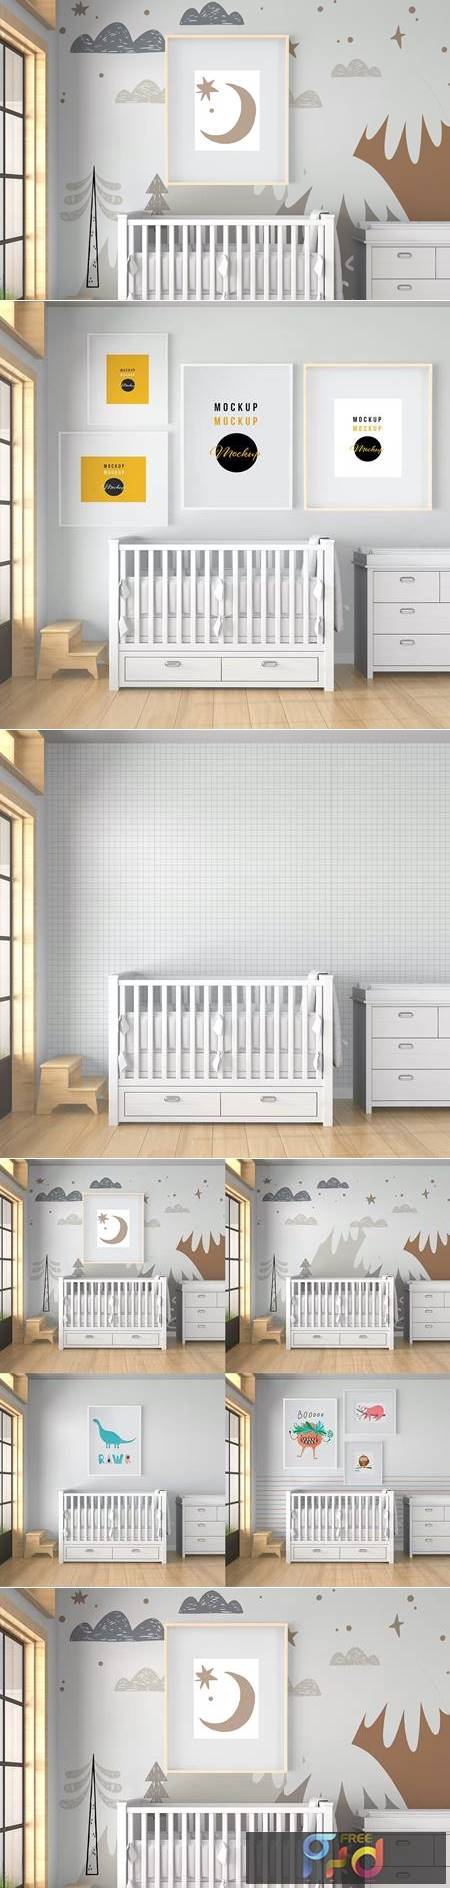 Baby Room with Mural Wall and Frames Mockup C83UZKH 1